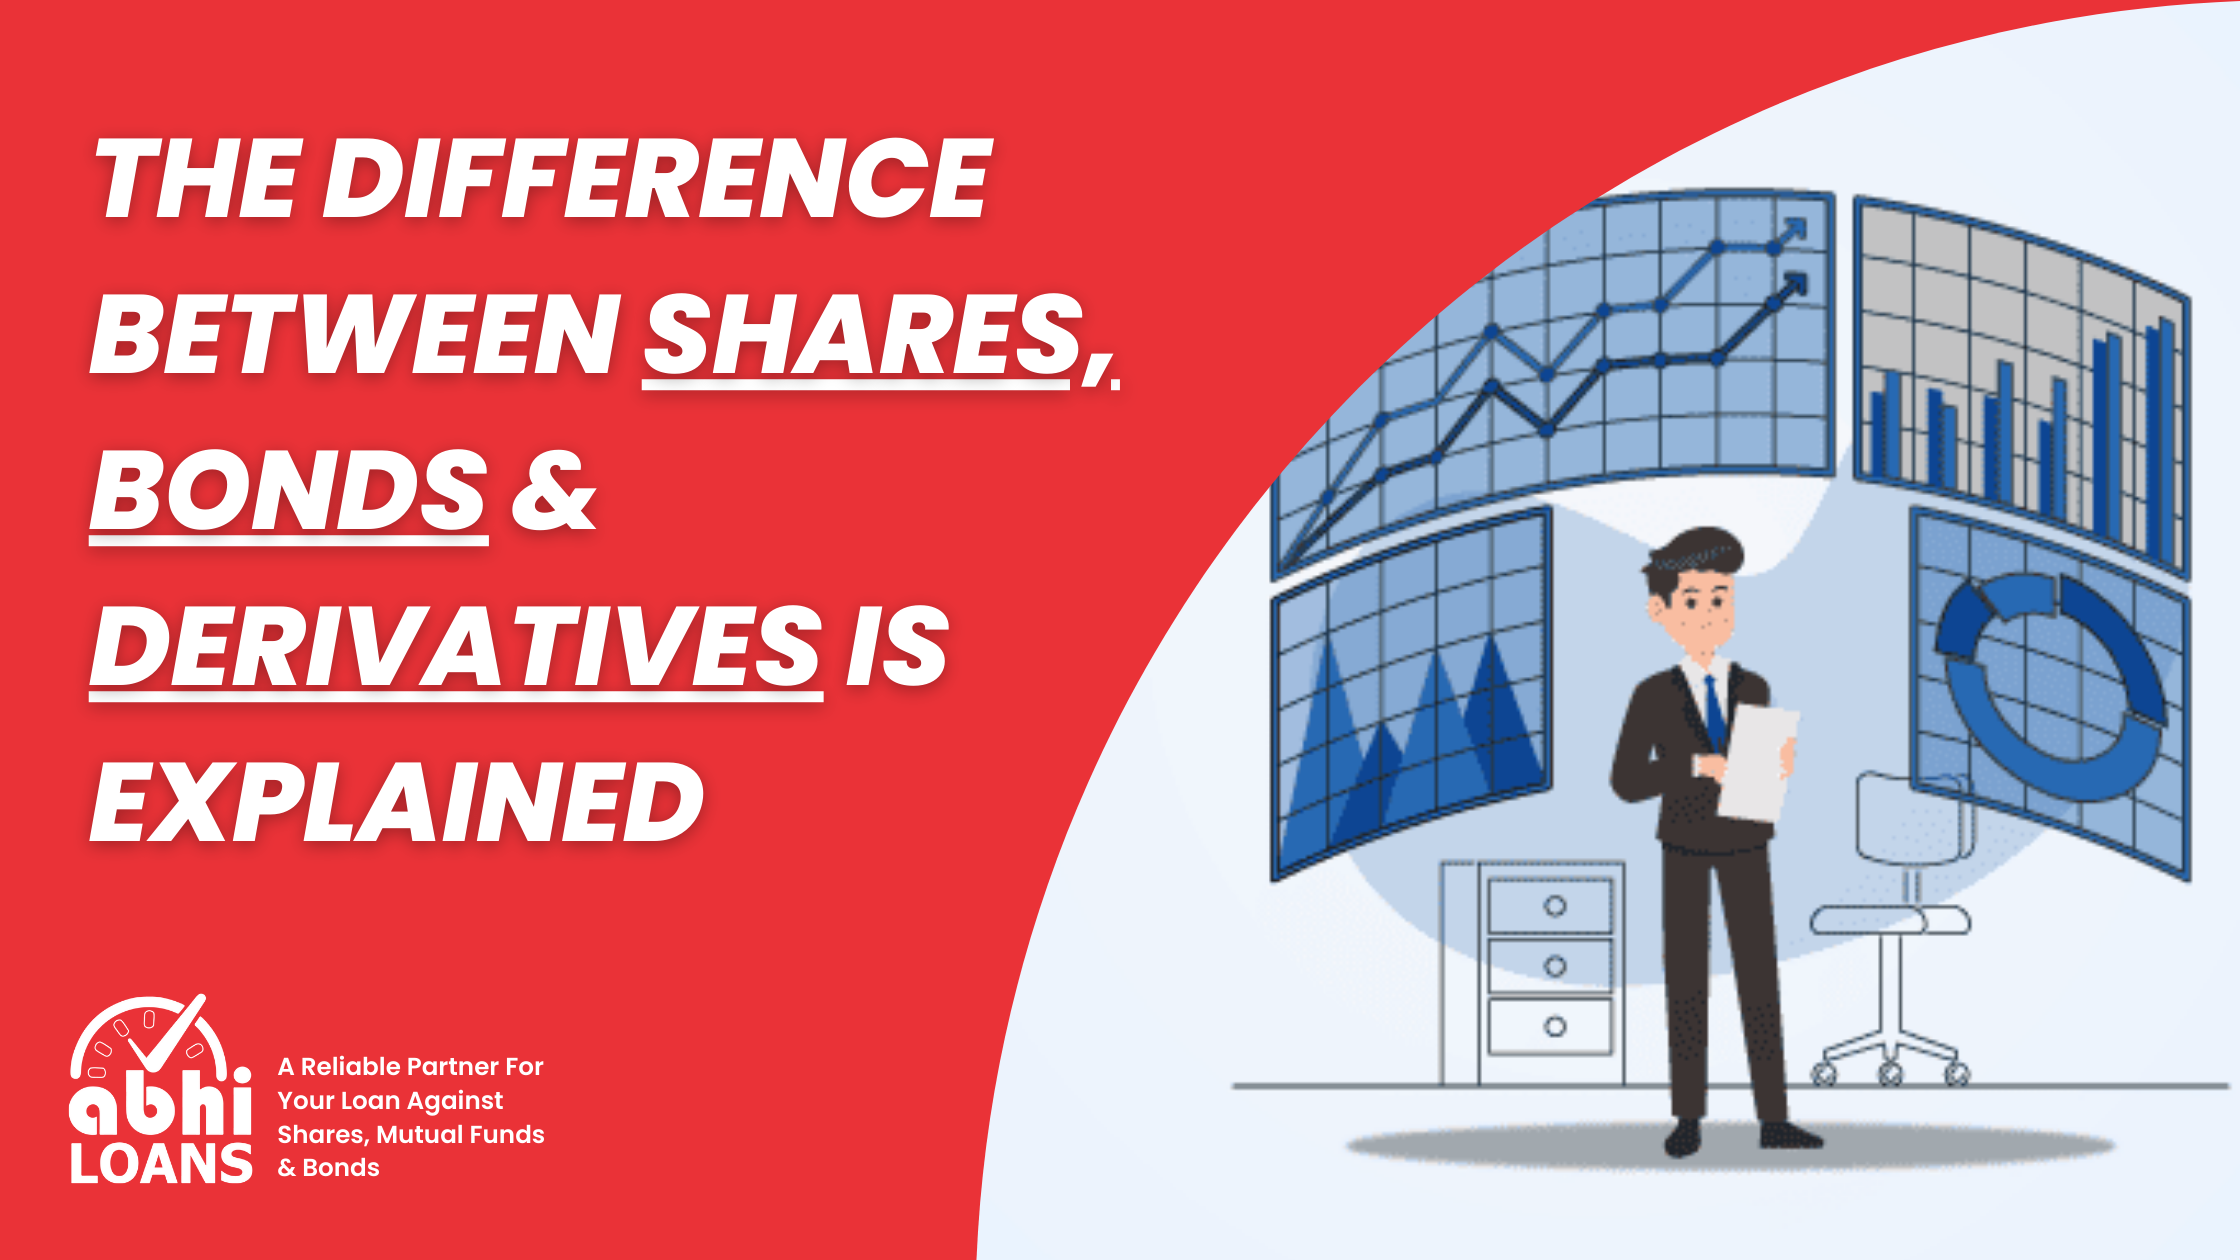 The Difference Between Shares, Bonds & Derivatives is Explained